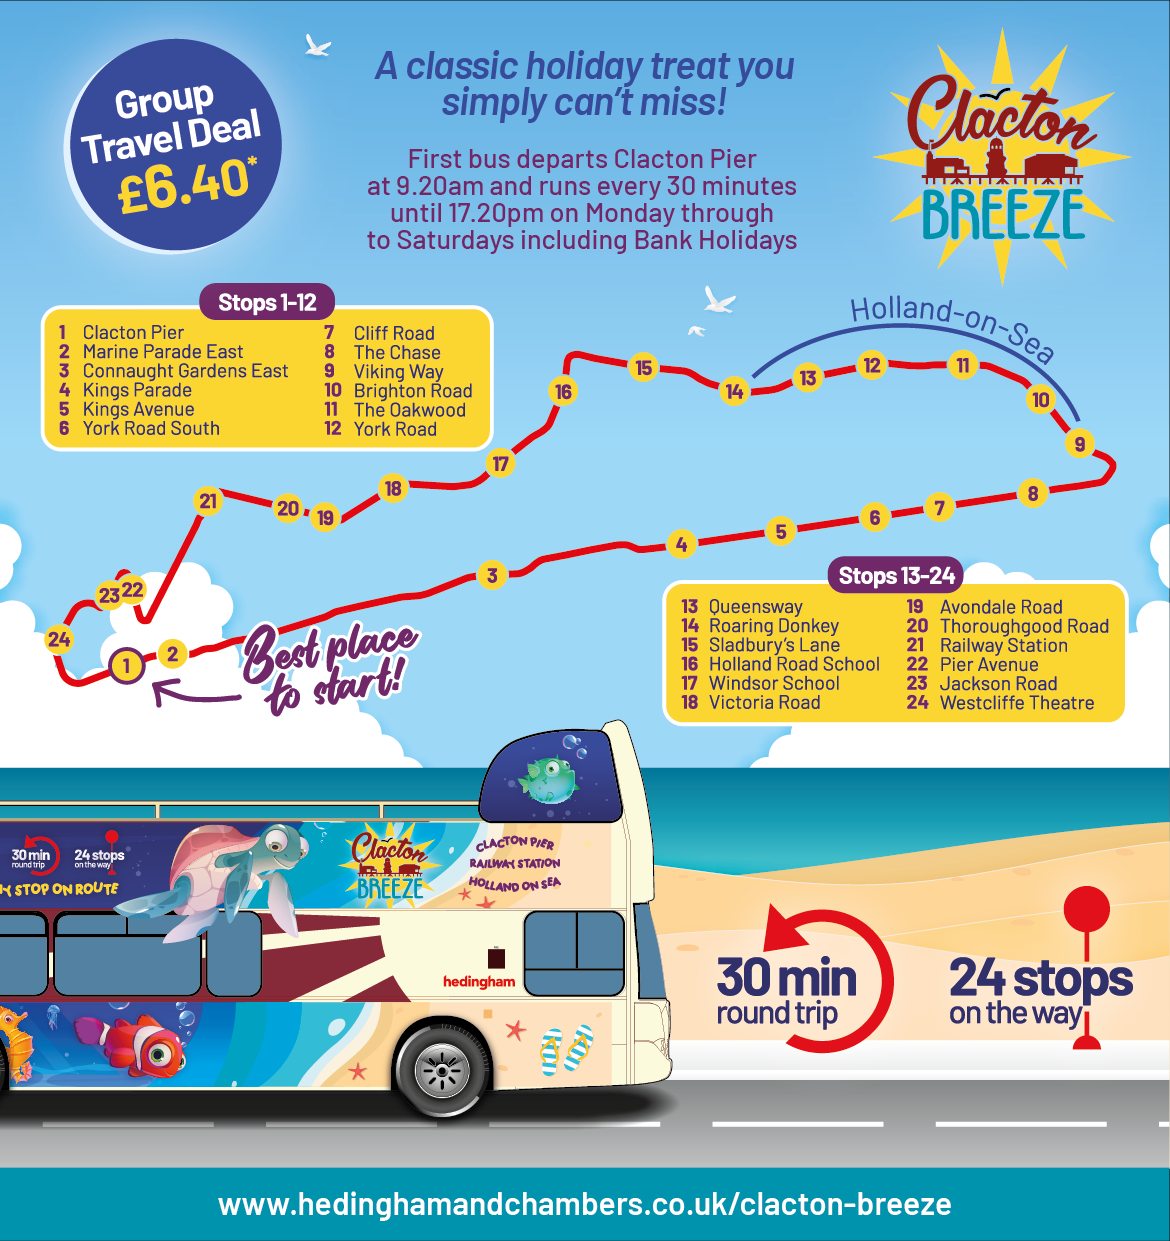 Image of Claton Breeeze route map 